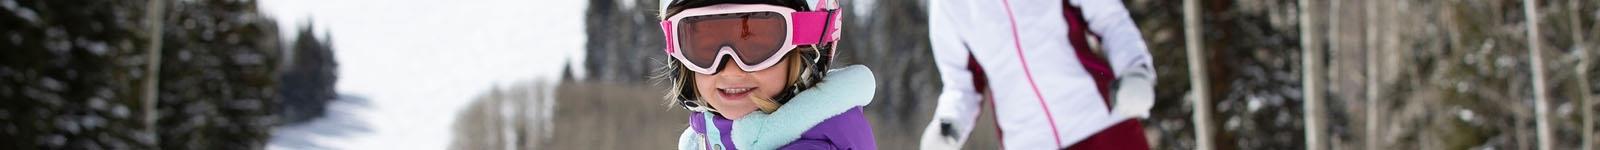 Anon Ski Goggles for Kids (Ages 6-16) 